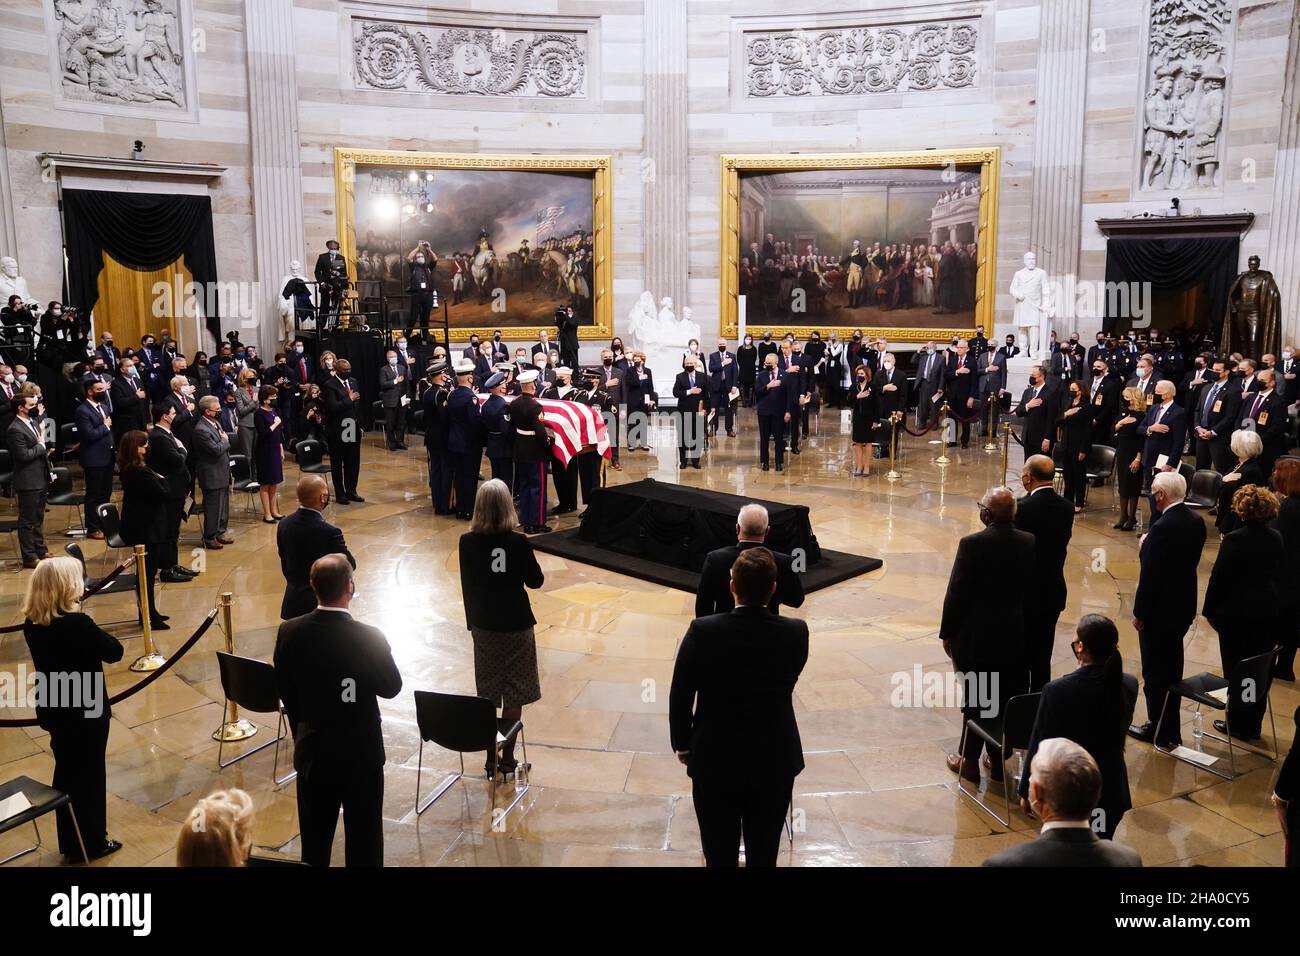 The casket of former Republican Senator from Kansas Robert J. Dole arrives during a ceremony preceding the lying in state in the Rotunda of the US Capitol in Washington, DC, USA, 09 December 2021. Bob Dole will lie in state at the Capitol today and will be honored with a memorial service at the National Cathedral tomorrow. Dole, a WWII veteran, died at the age of 98 on 05 December 2021.Credit: Shawn Thew/Pool via CNP /MediaPunch Stock Photo